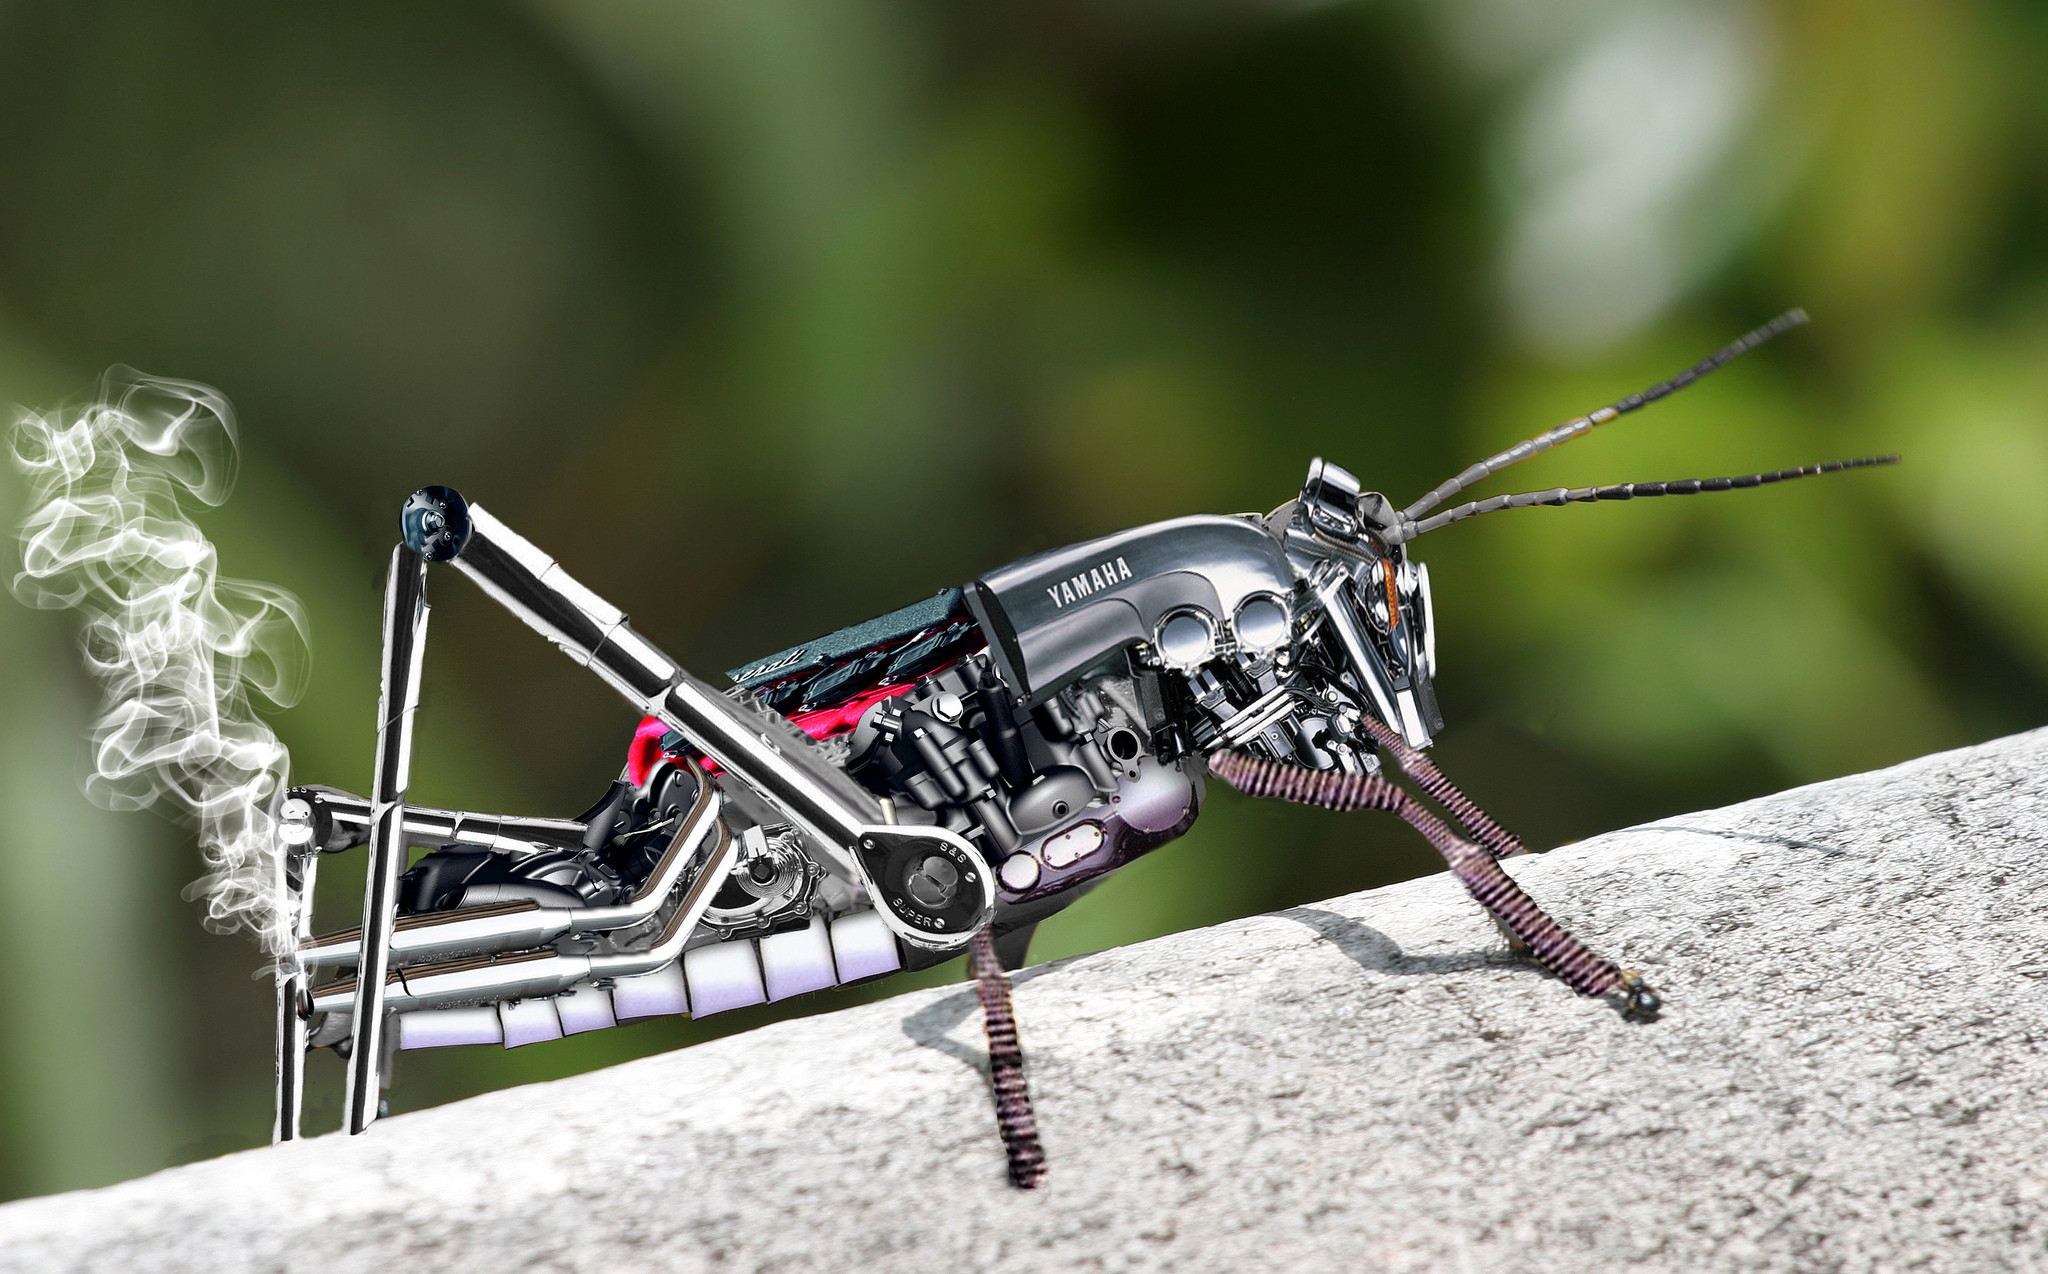 2048x1274 creative, Insects, Grasshopper, Technics, Engine, Yamaha, Humor, Funny, Sci  fi, Steampunk, Smoke Wallpapers HD / Desktop and Mobile Backgrounds